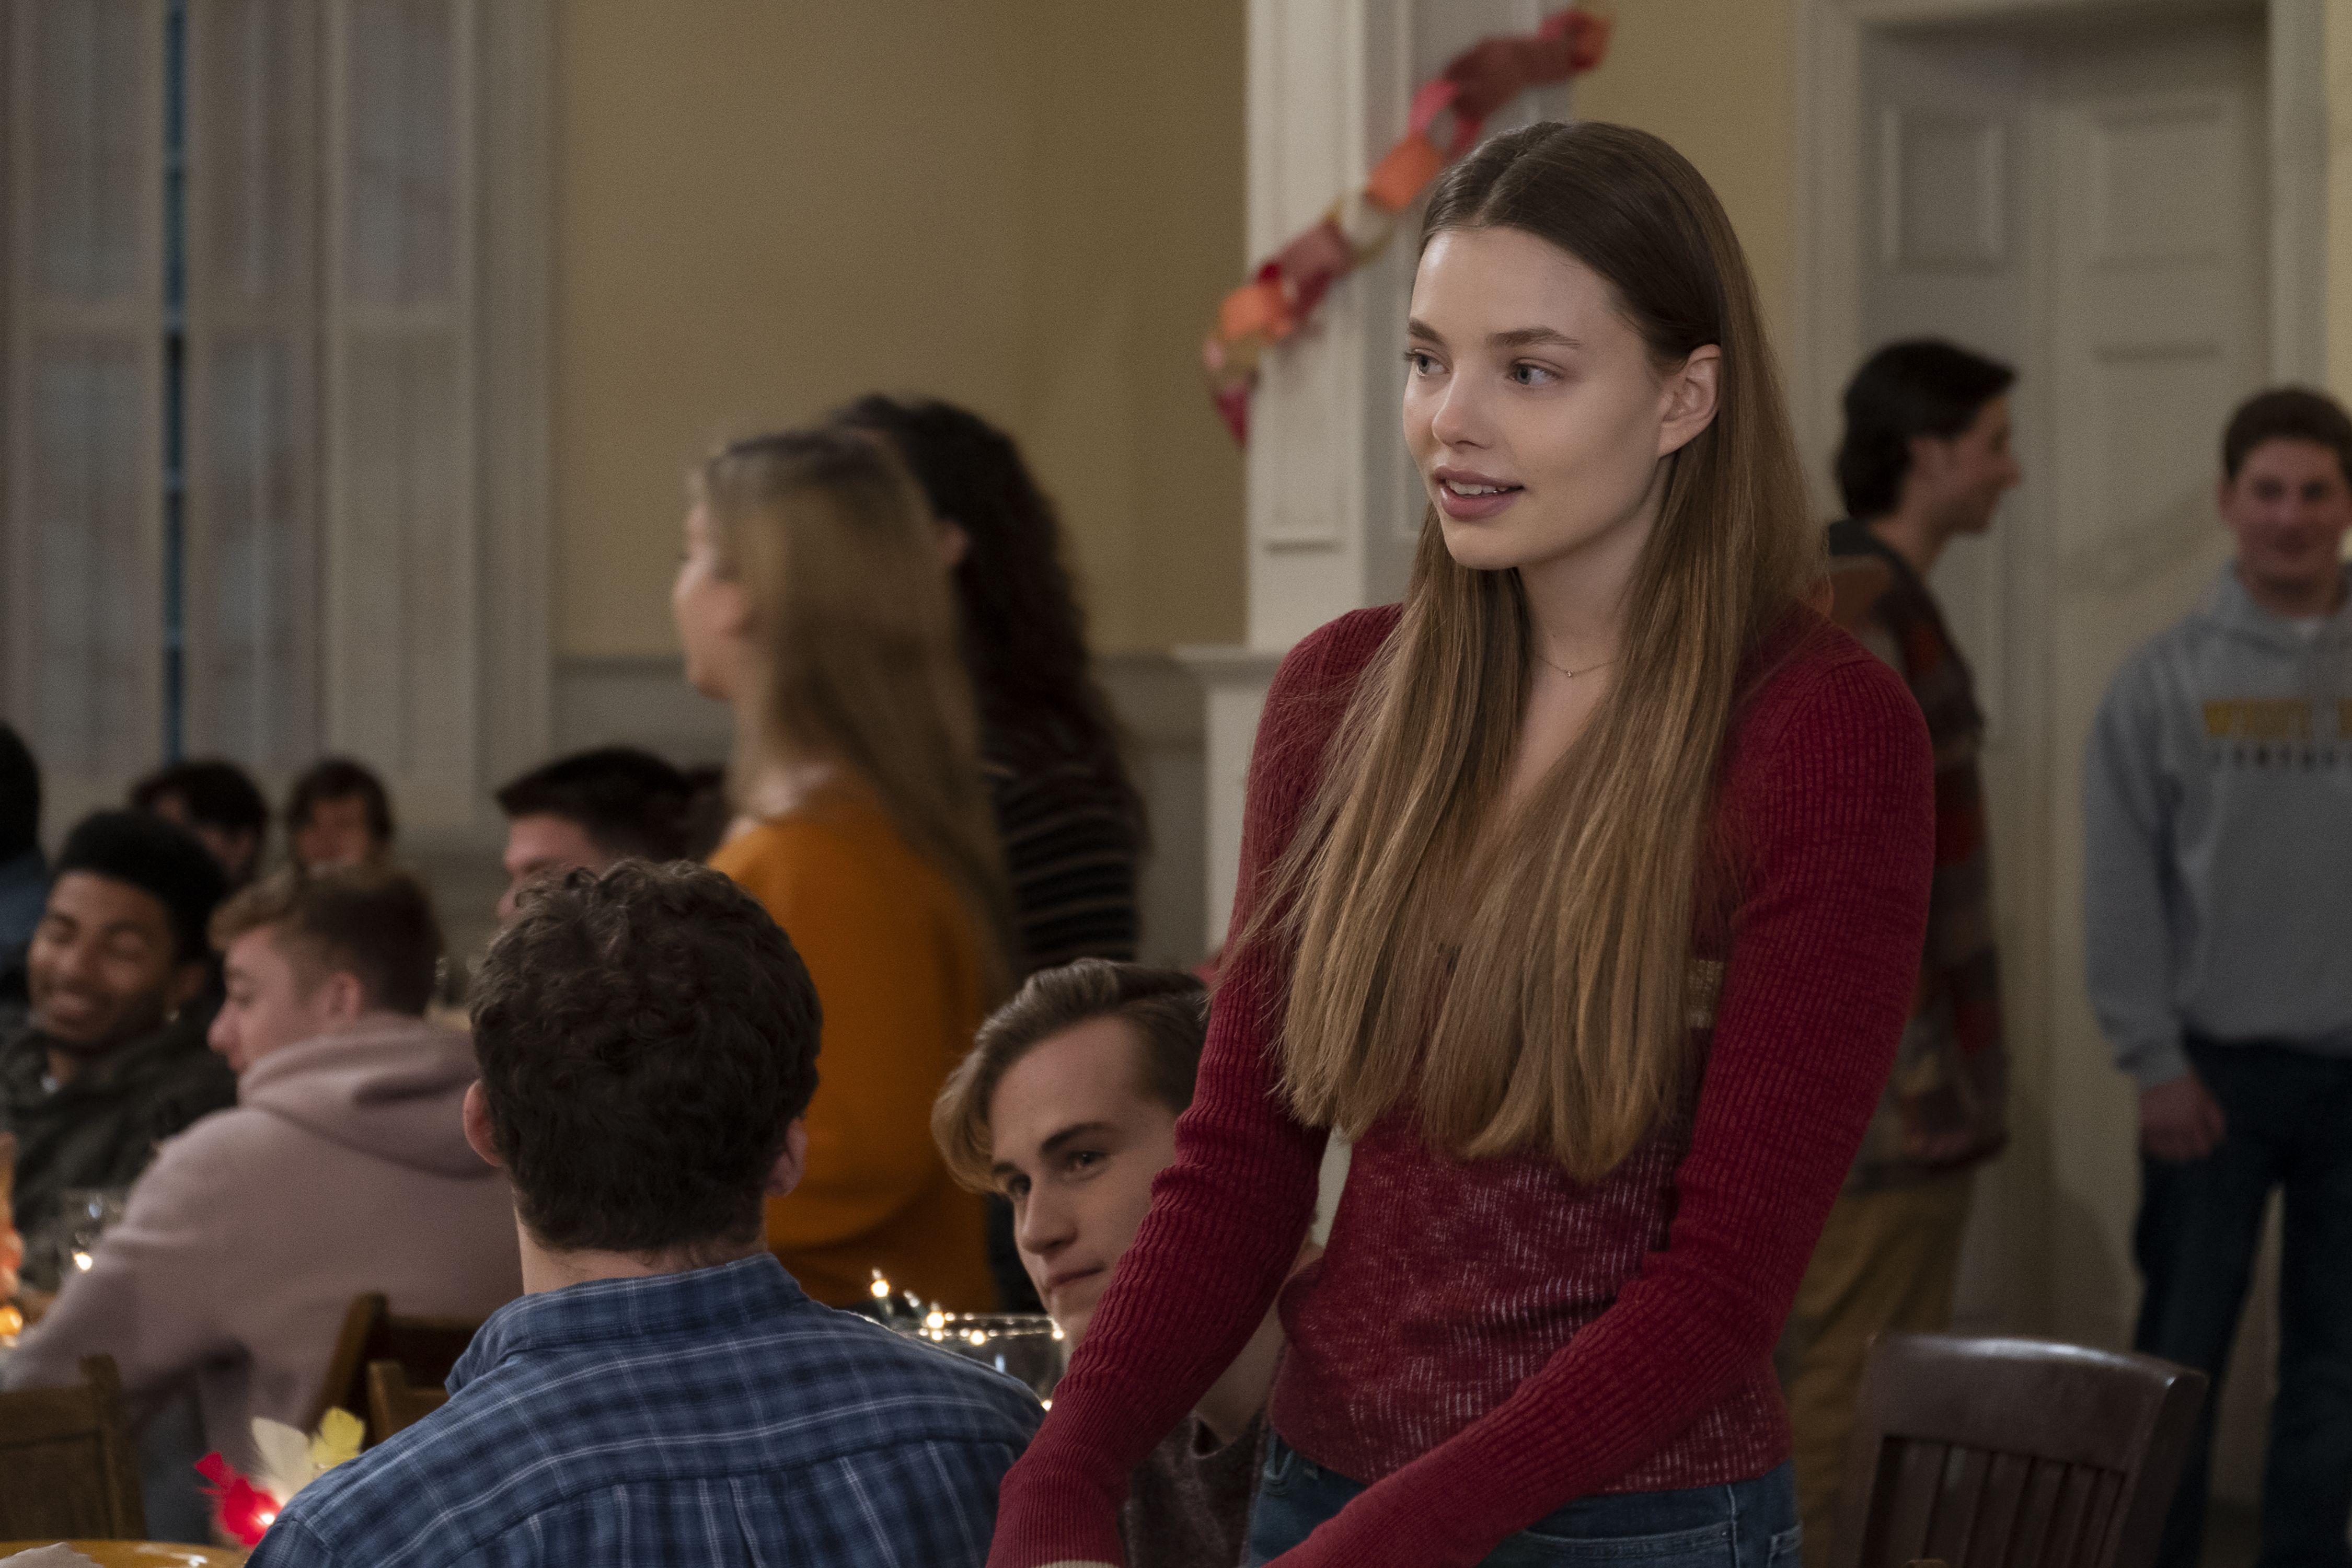 Kristine froseth performed the role of Kelly Aldrich in the series The society